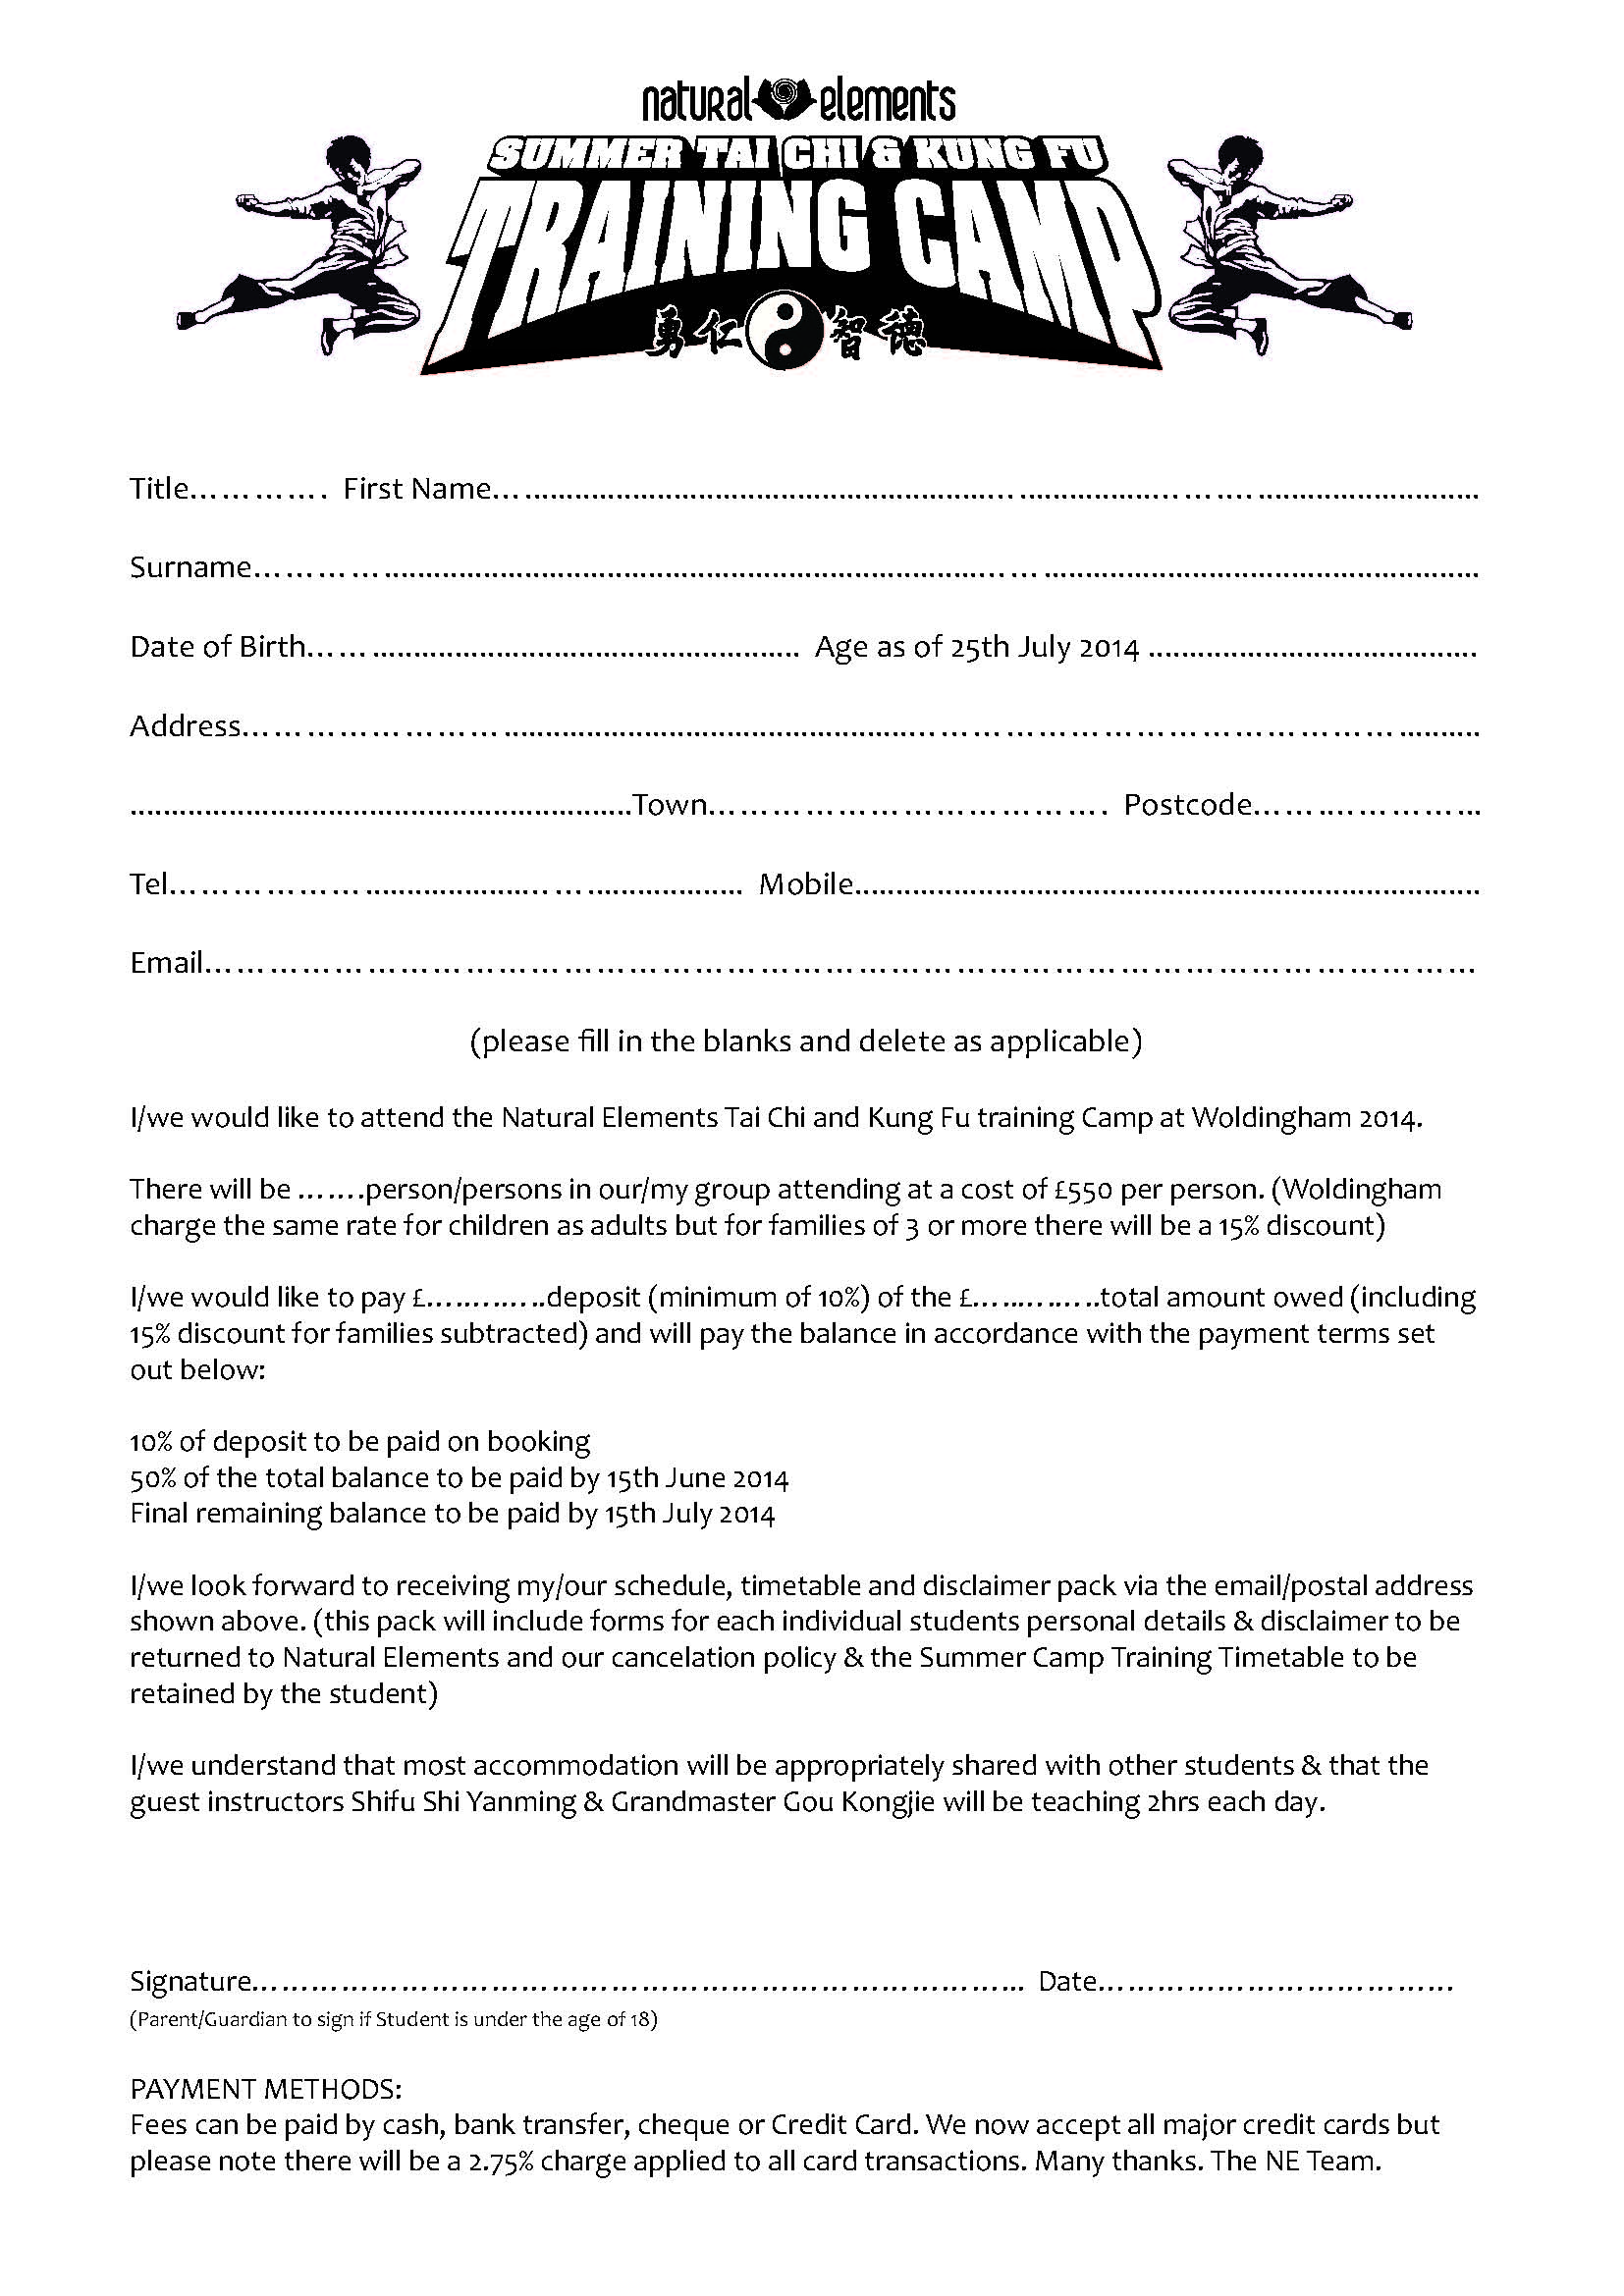 Summer 2014 Training Camp Booking Form